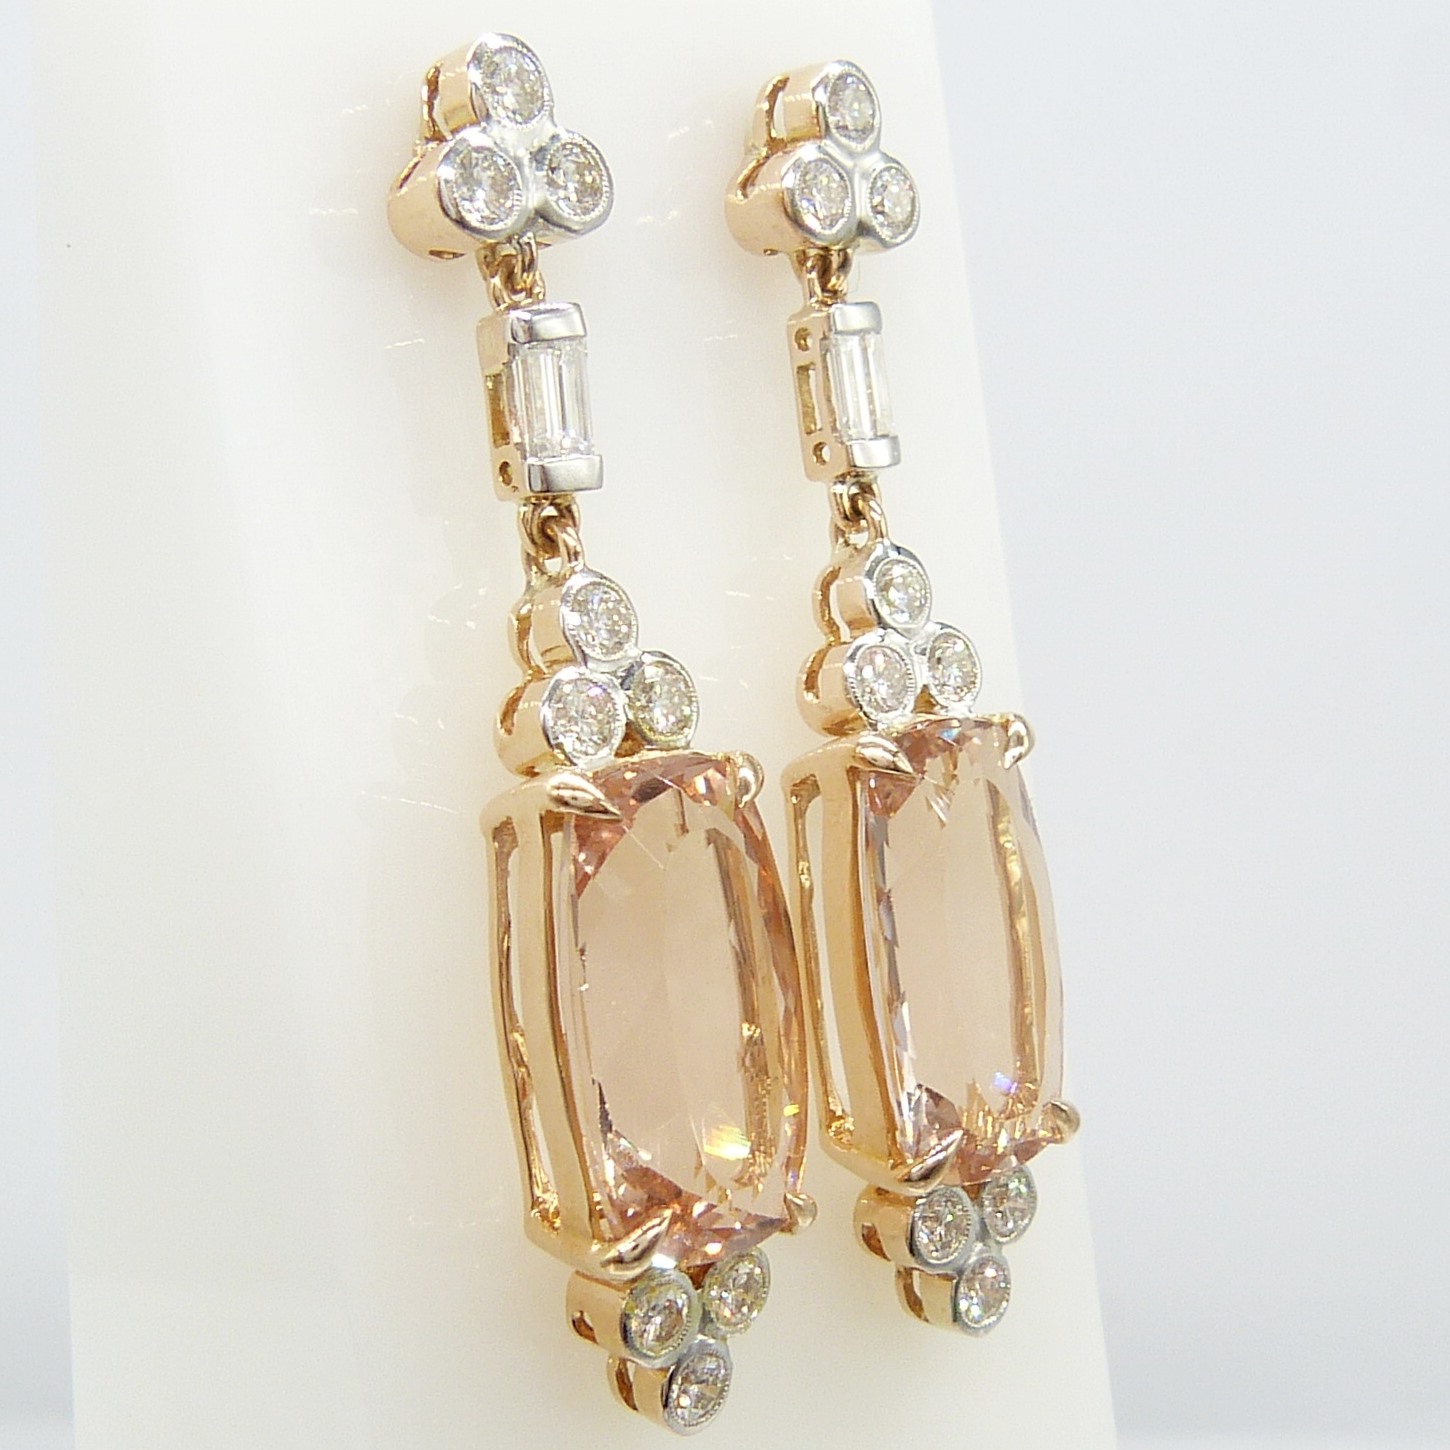 A fine quality pair of checkerboard cushion-cut morganite and diamond drop earrings in rose gold - Image 9 of 12